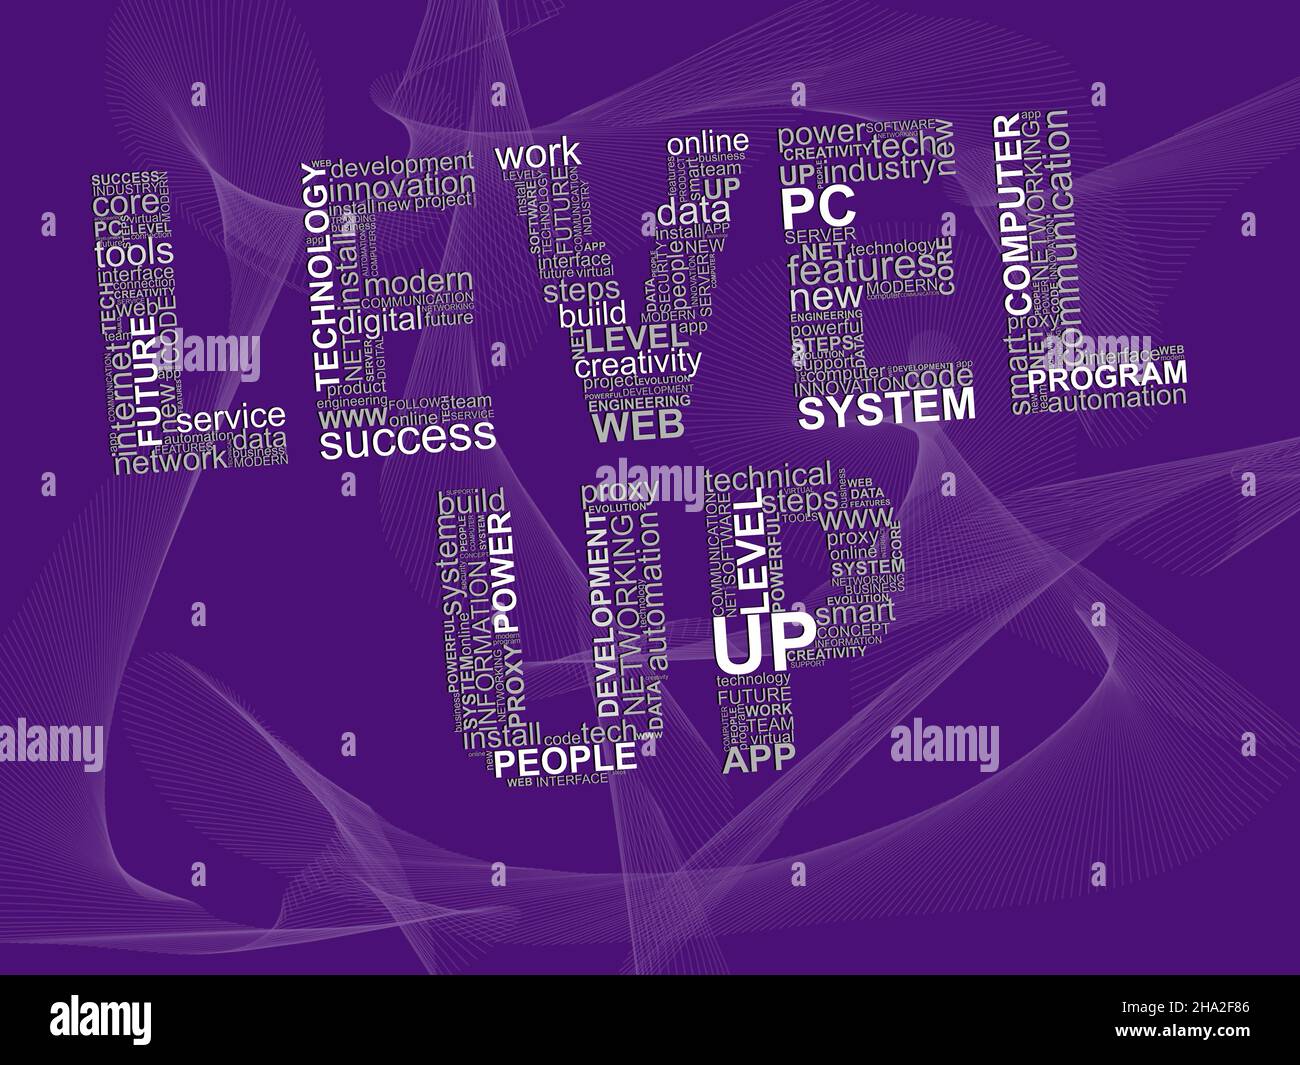 Words LEVEL UP with technology words inside. Concept with cloud words on purple background. Stock Photo